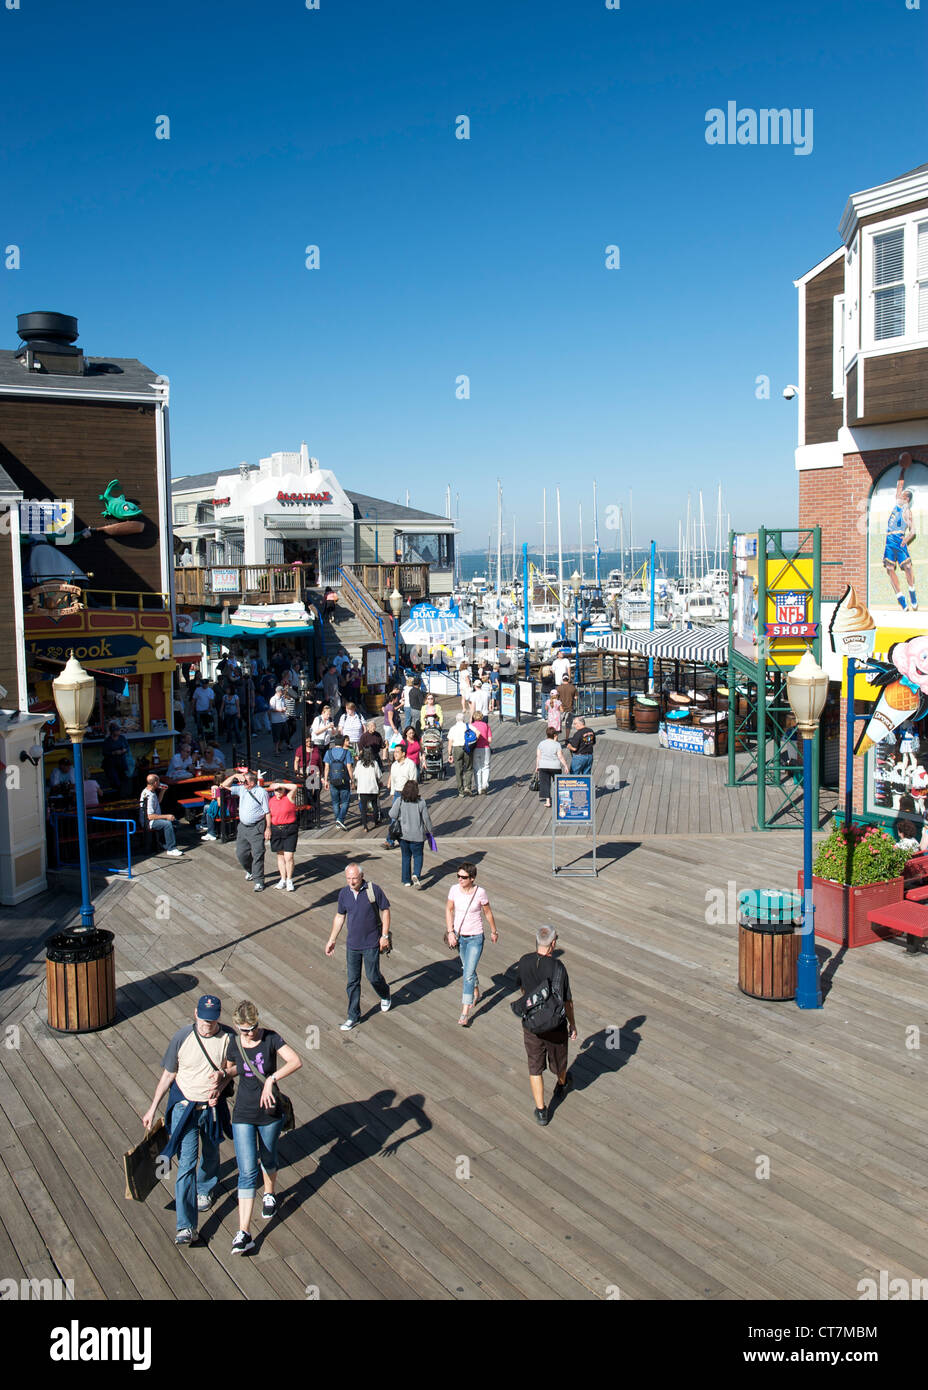 Pier 39 in the Fisherman's Wharf waterfront area of San Francisco, California, USA. Stock Photo